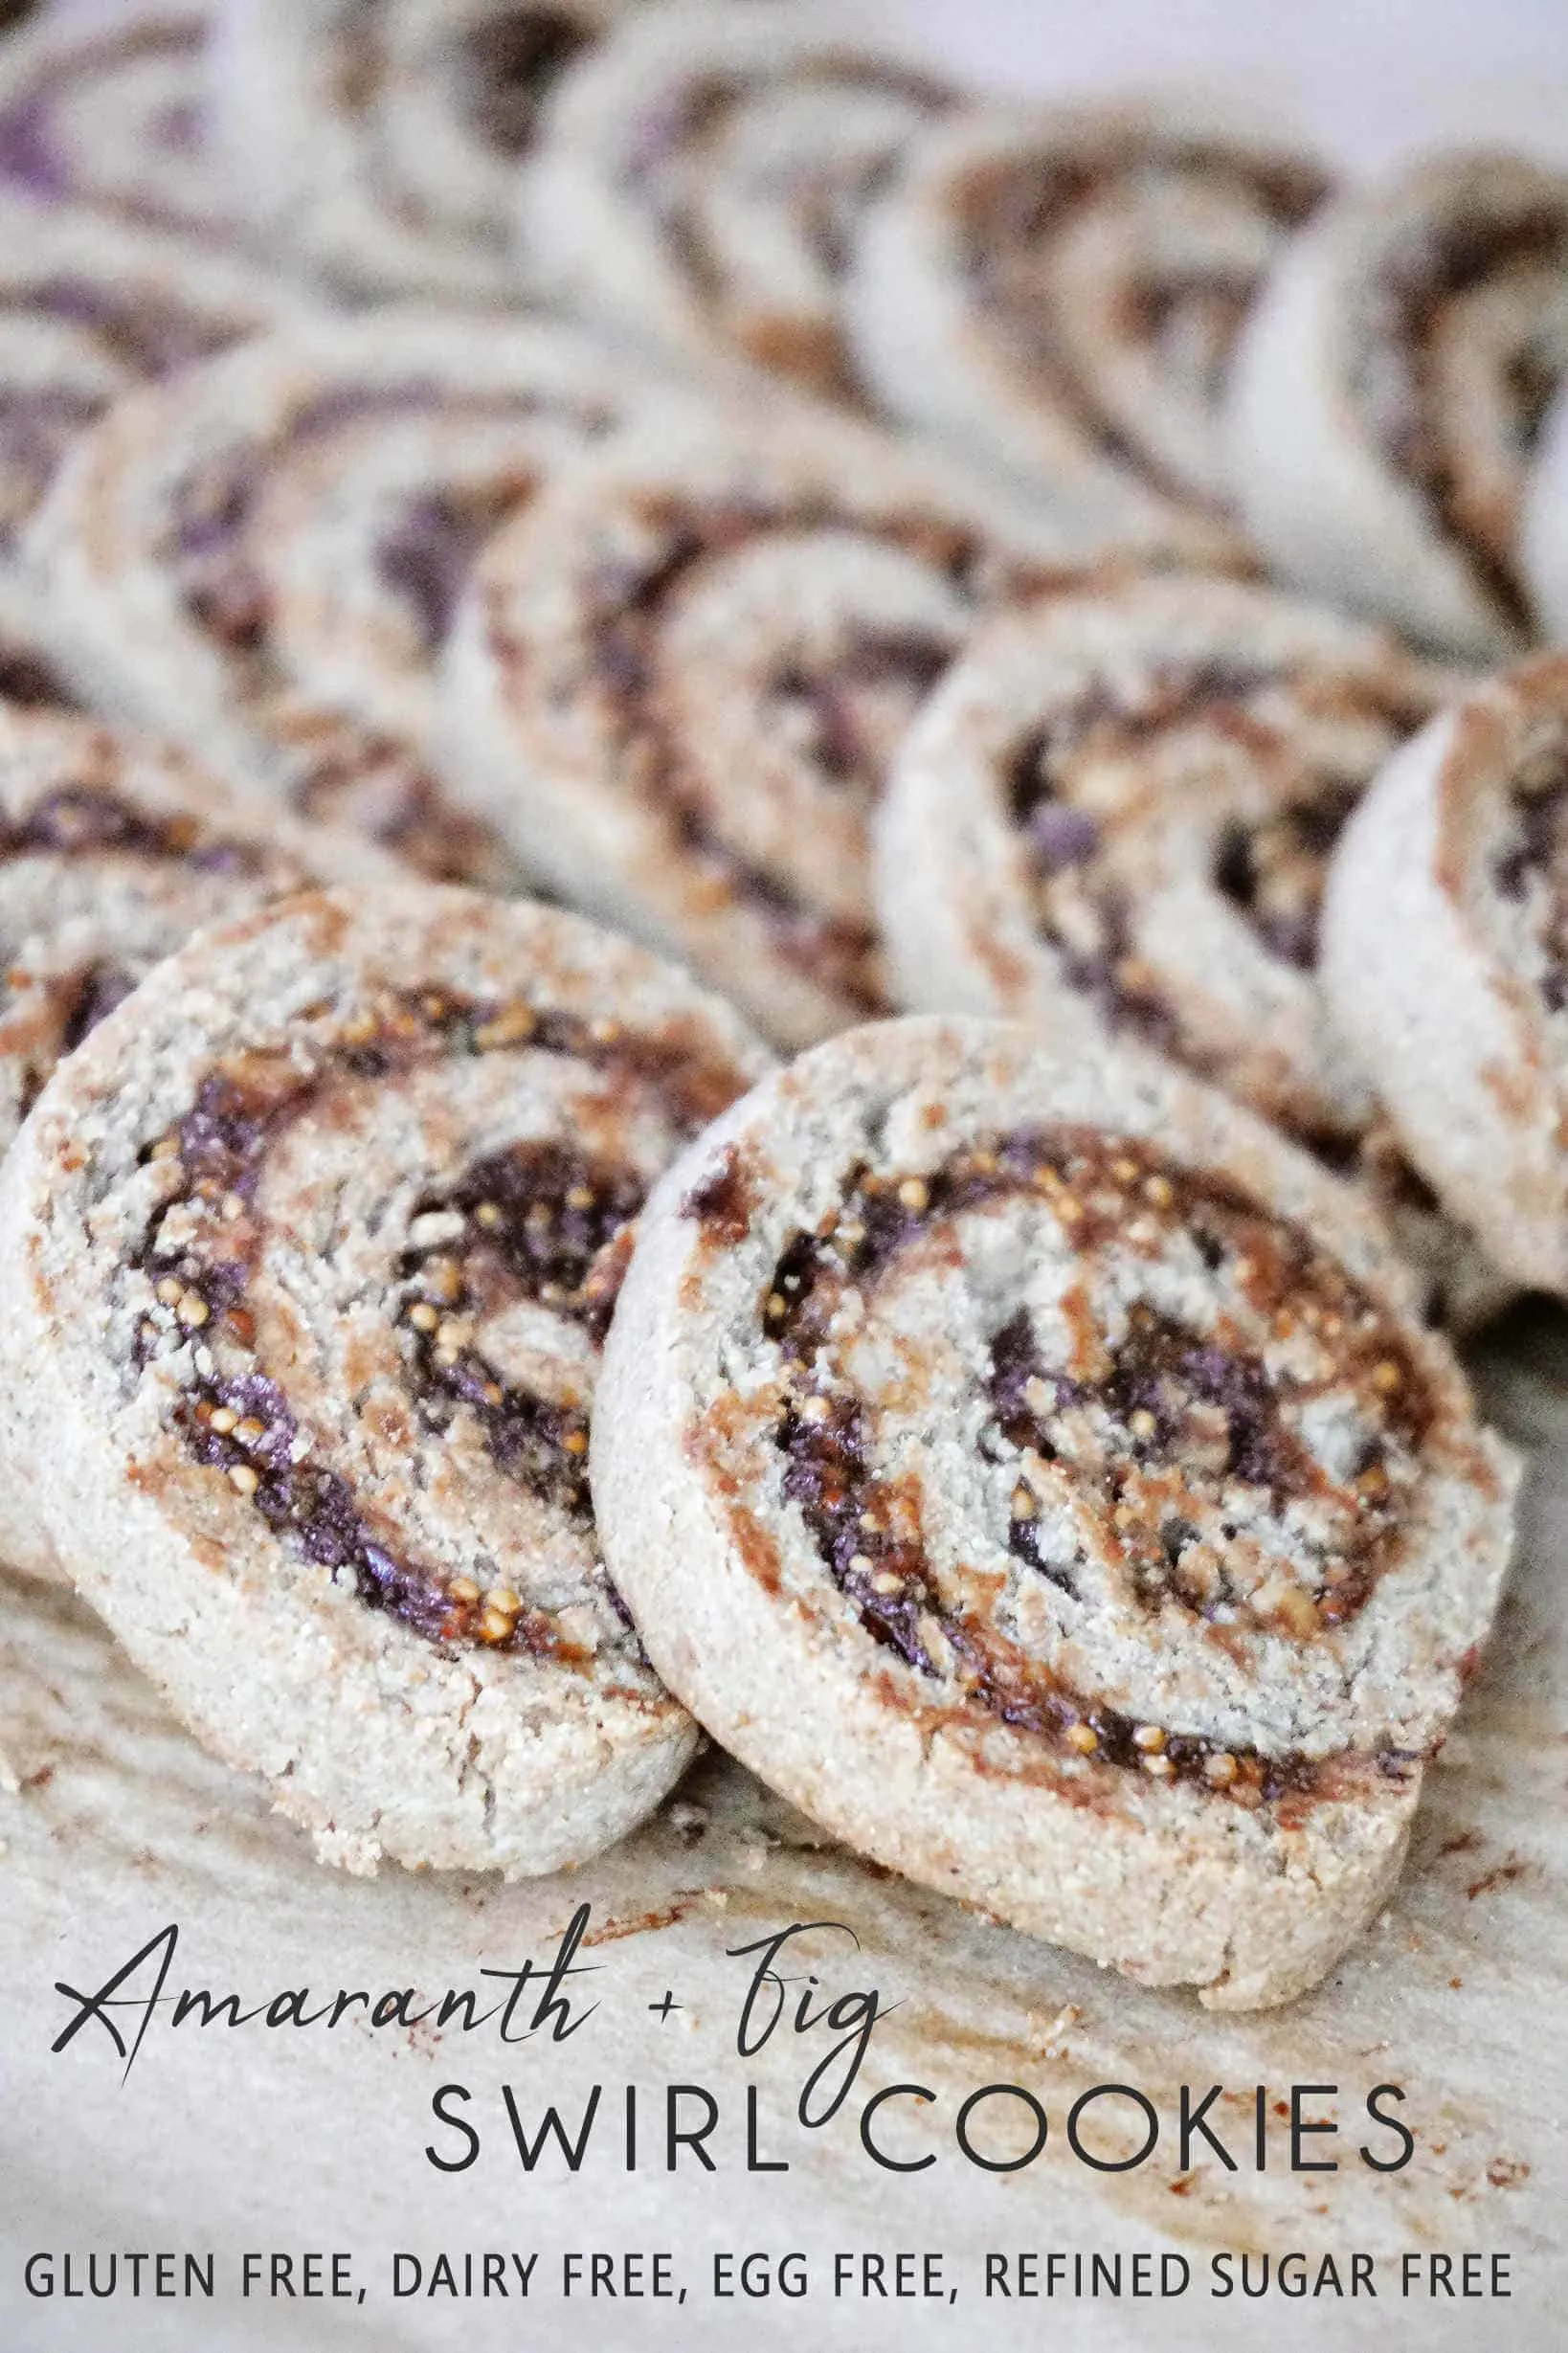 ACrisp fig pinwheel cookies with a swirl of dried figs and chopped walnuts. They are also eggless and dairy free, suitable for gluten free and vegan diets. You can enjoy them as a snack, dessert or as a gift during holidays.